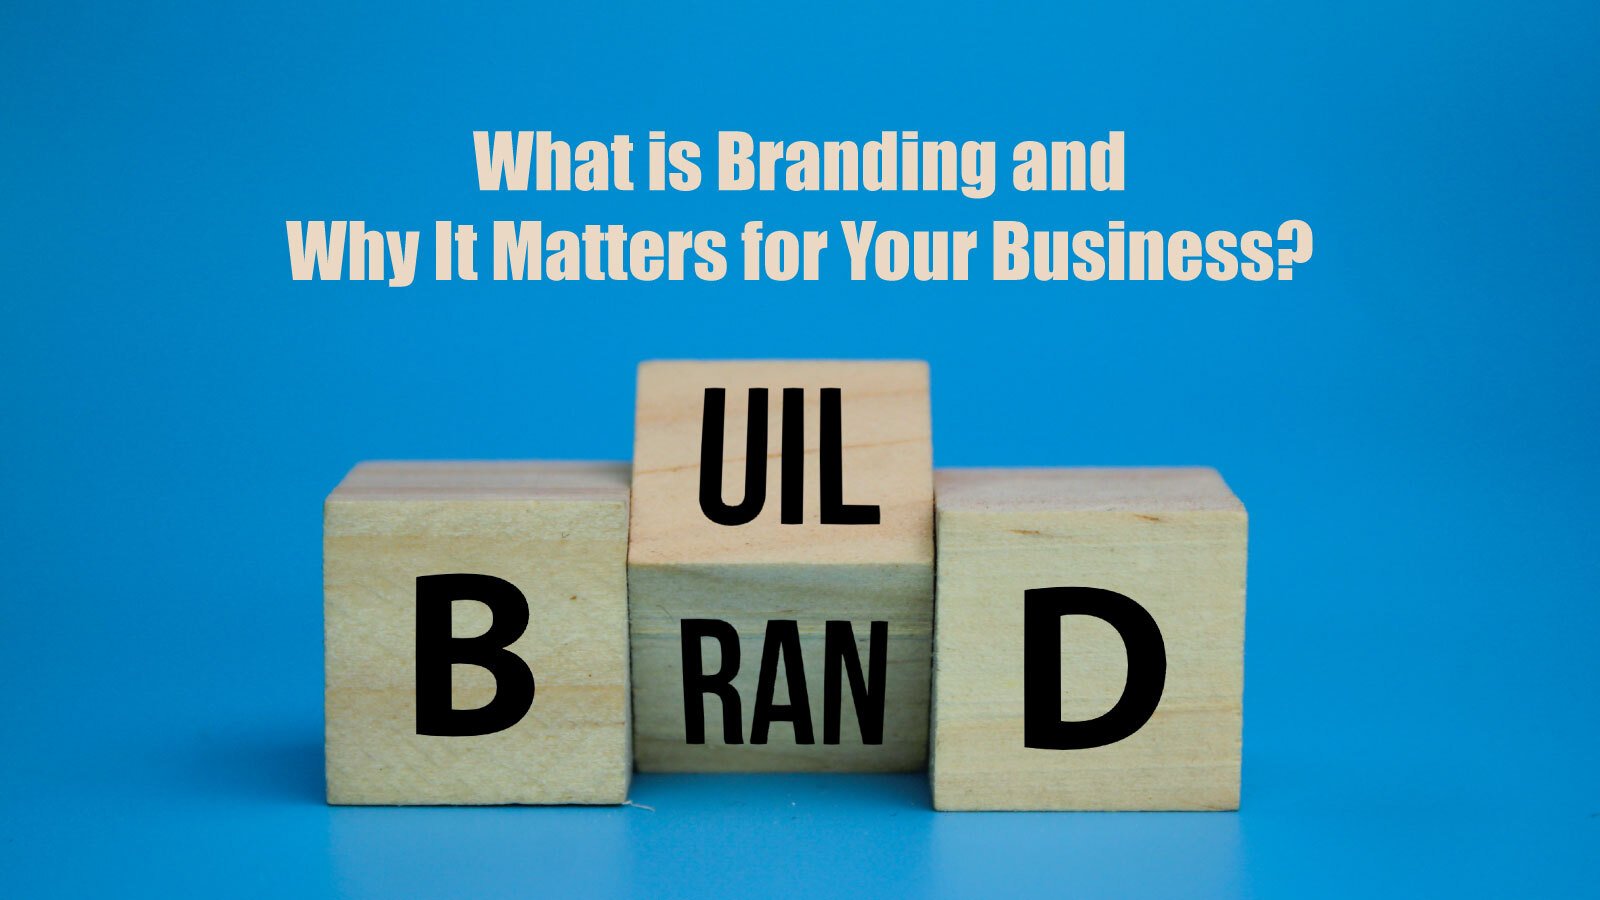 Branding: Key to Business Success and Growth